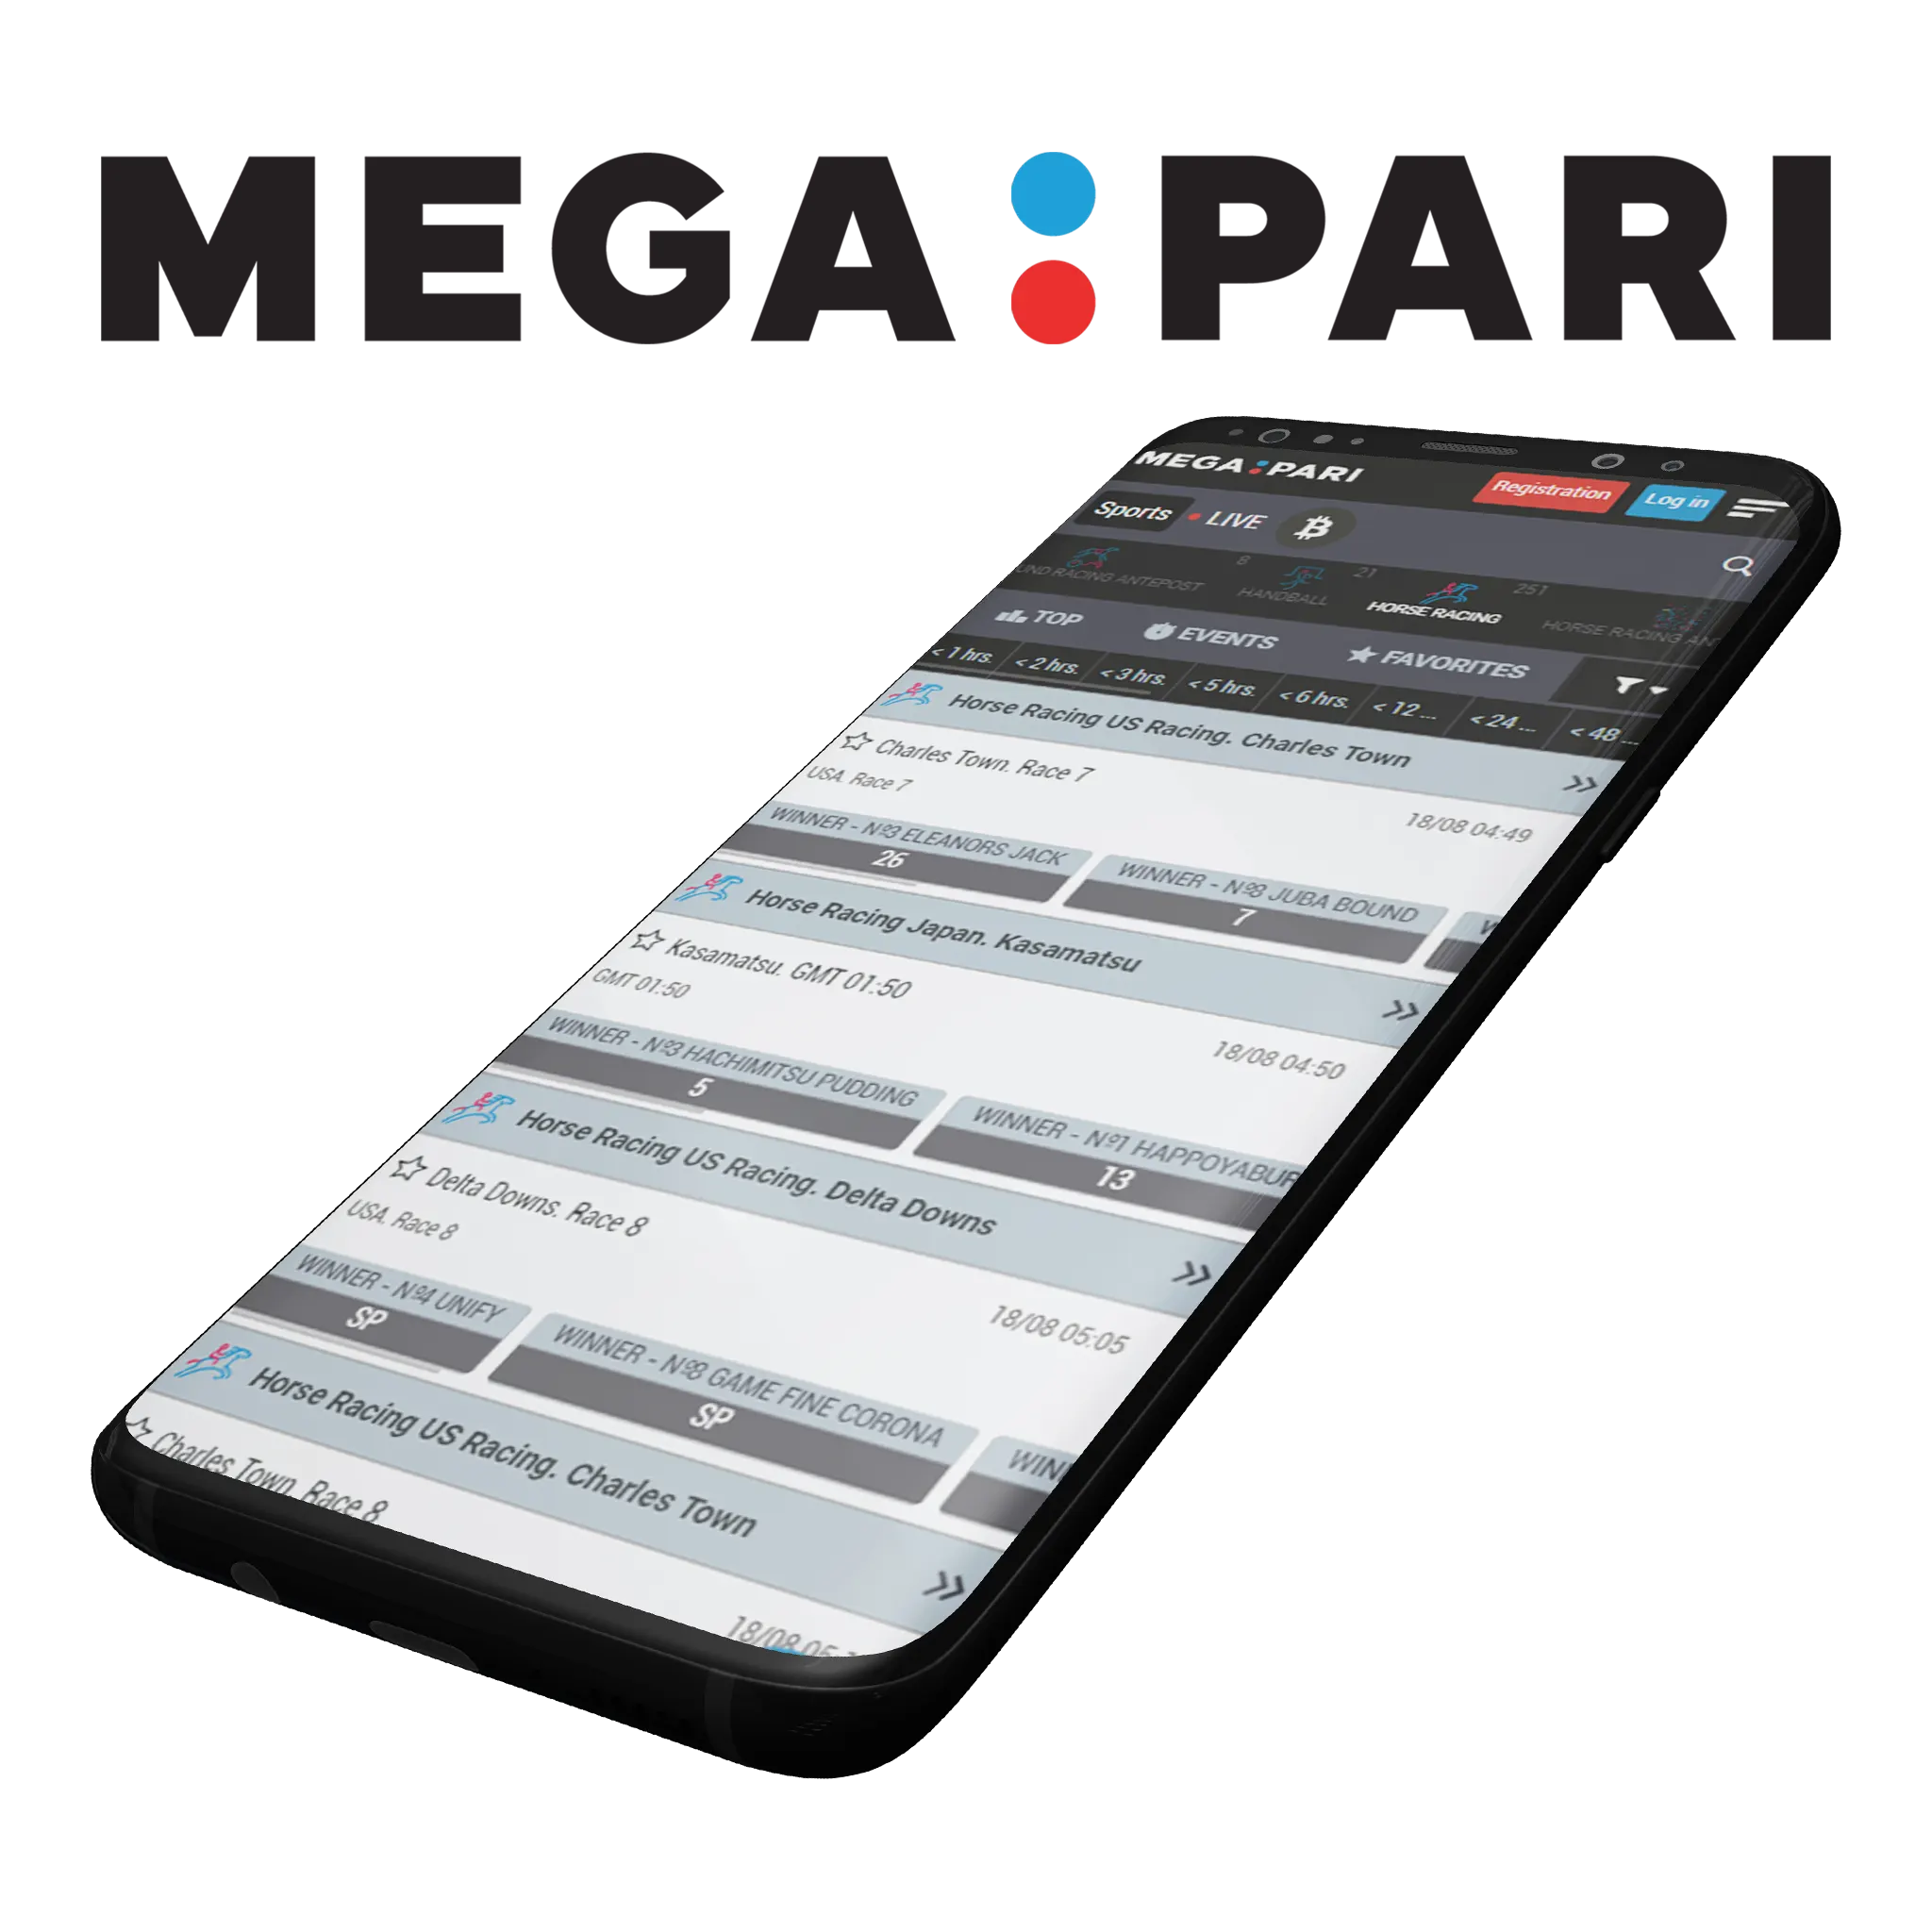 You can download and install the Megapari app on Android and iOS for horse racing betting.